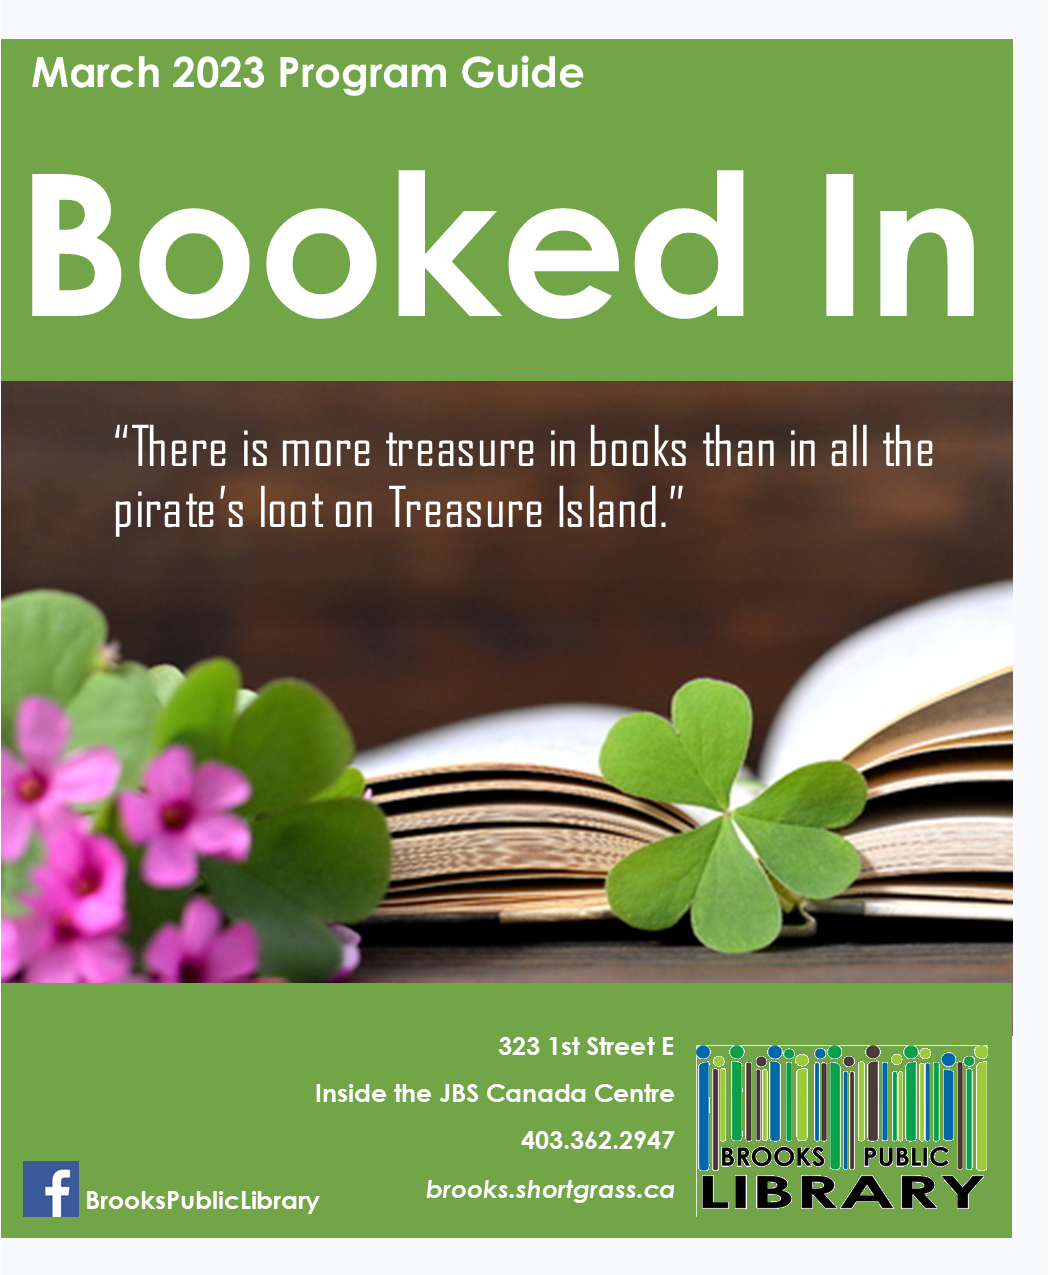 Booked In March 23 - Cover.jpg